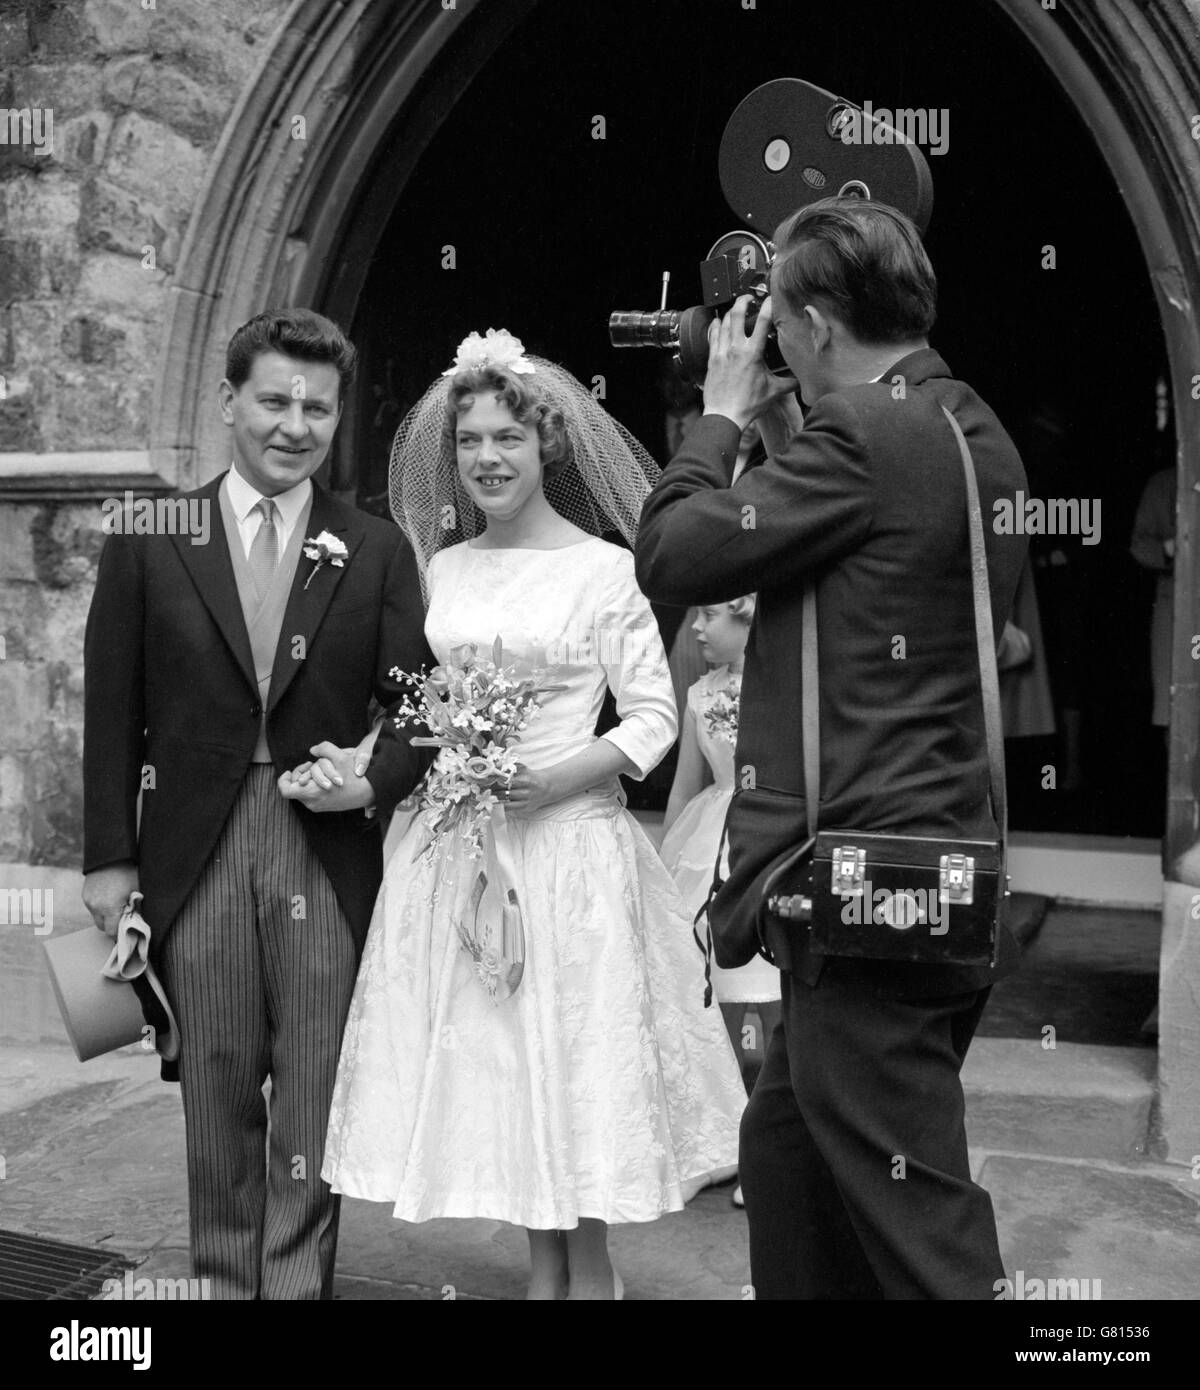 Richard Baker is filmed for TV as he leaves with his bride, formerly Margaret Martin, after their wedding at St Mary The Boltons church in Kensington, London. Stock Photo